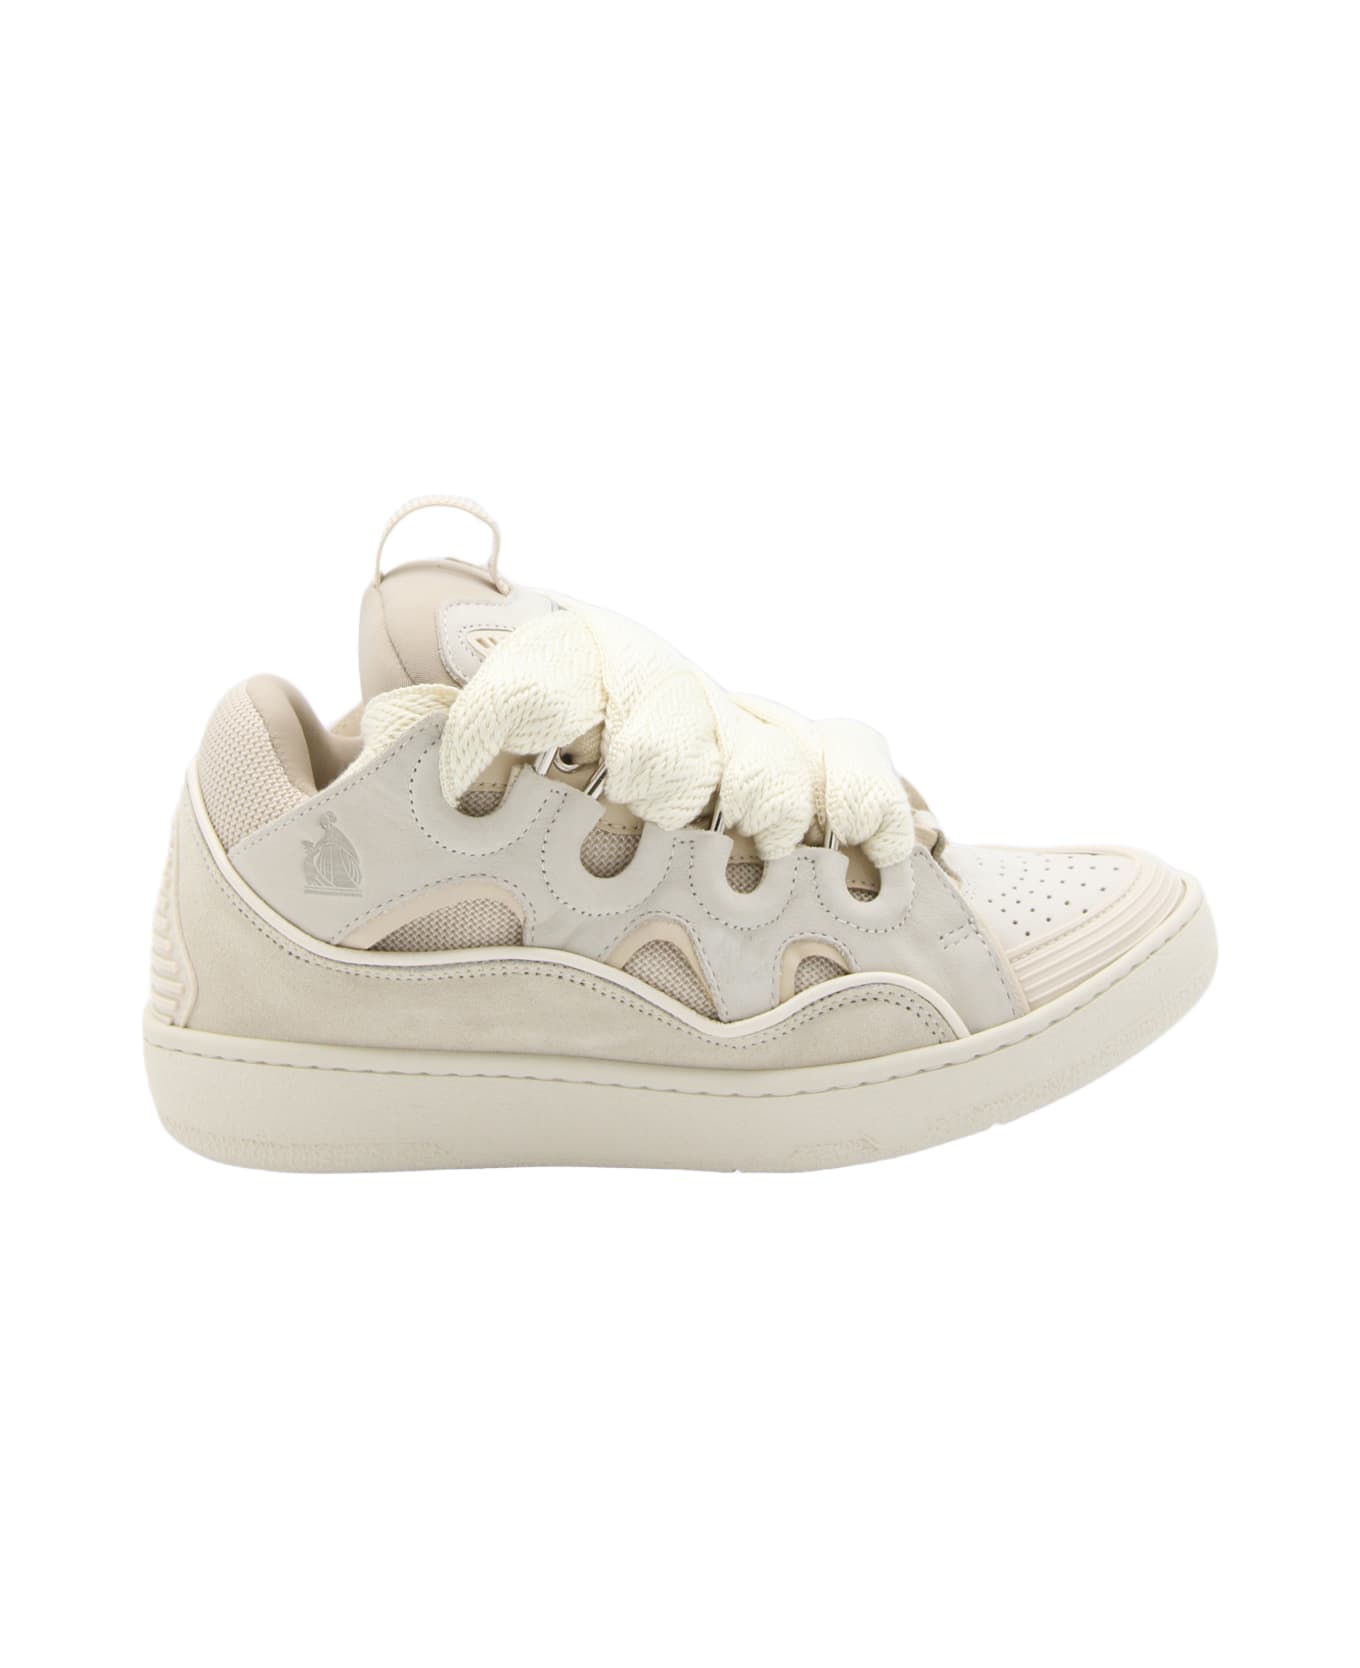 Lanvin White Leather Curb Sneakers - Beige スニーカー